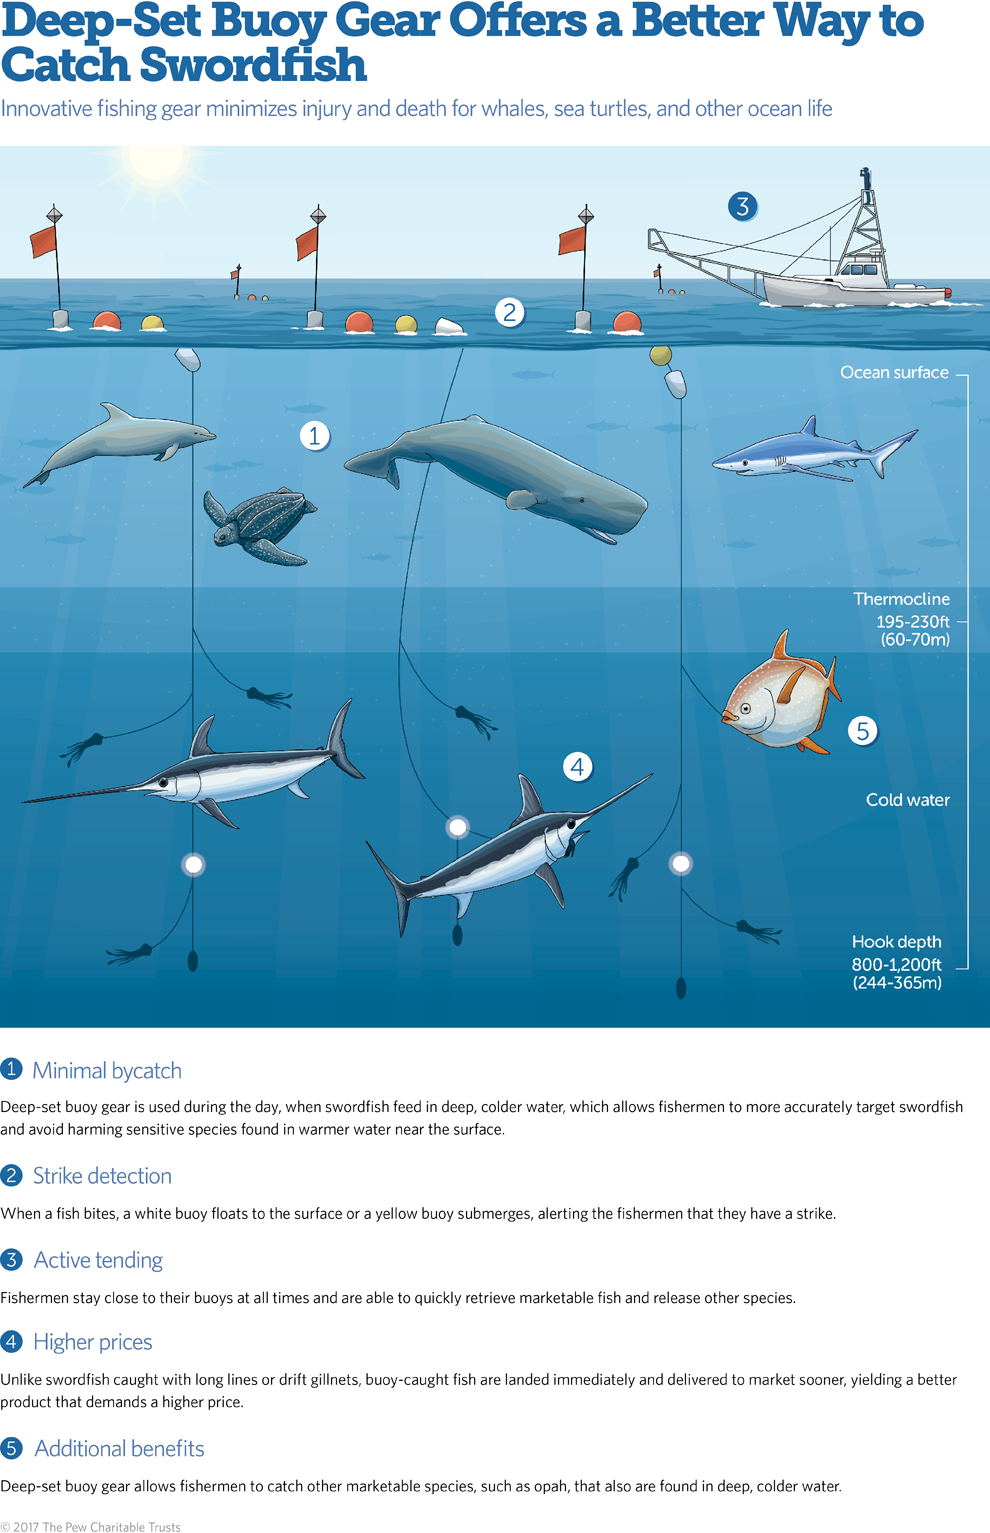 Newly Approved Fishing Gear Reduces Ocean Wildlife Entanglements